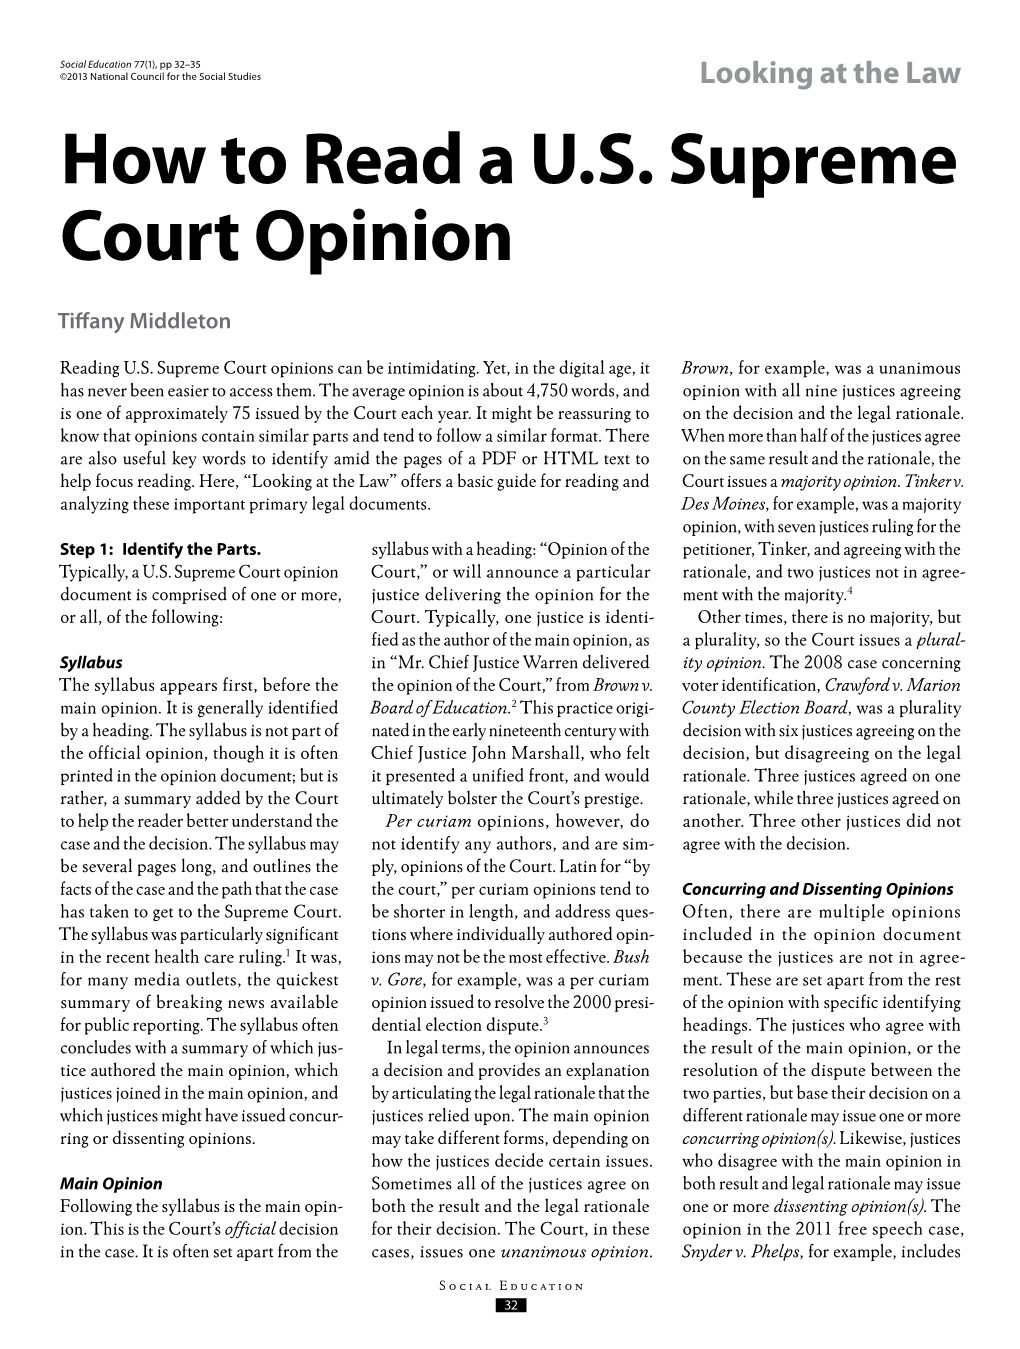 How to Read a U.S. Supreme Court Opinion